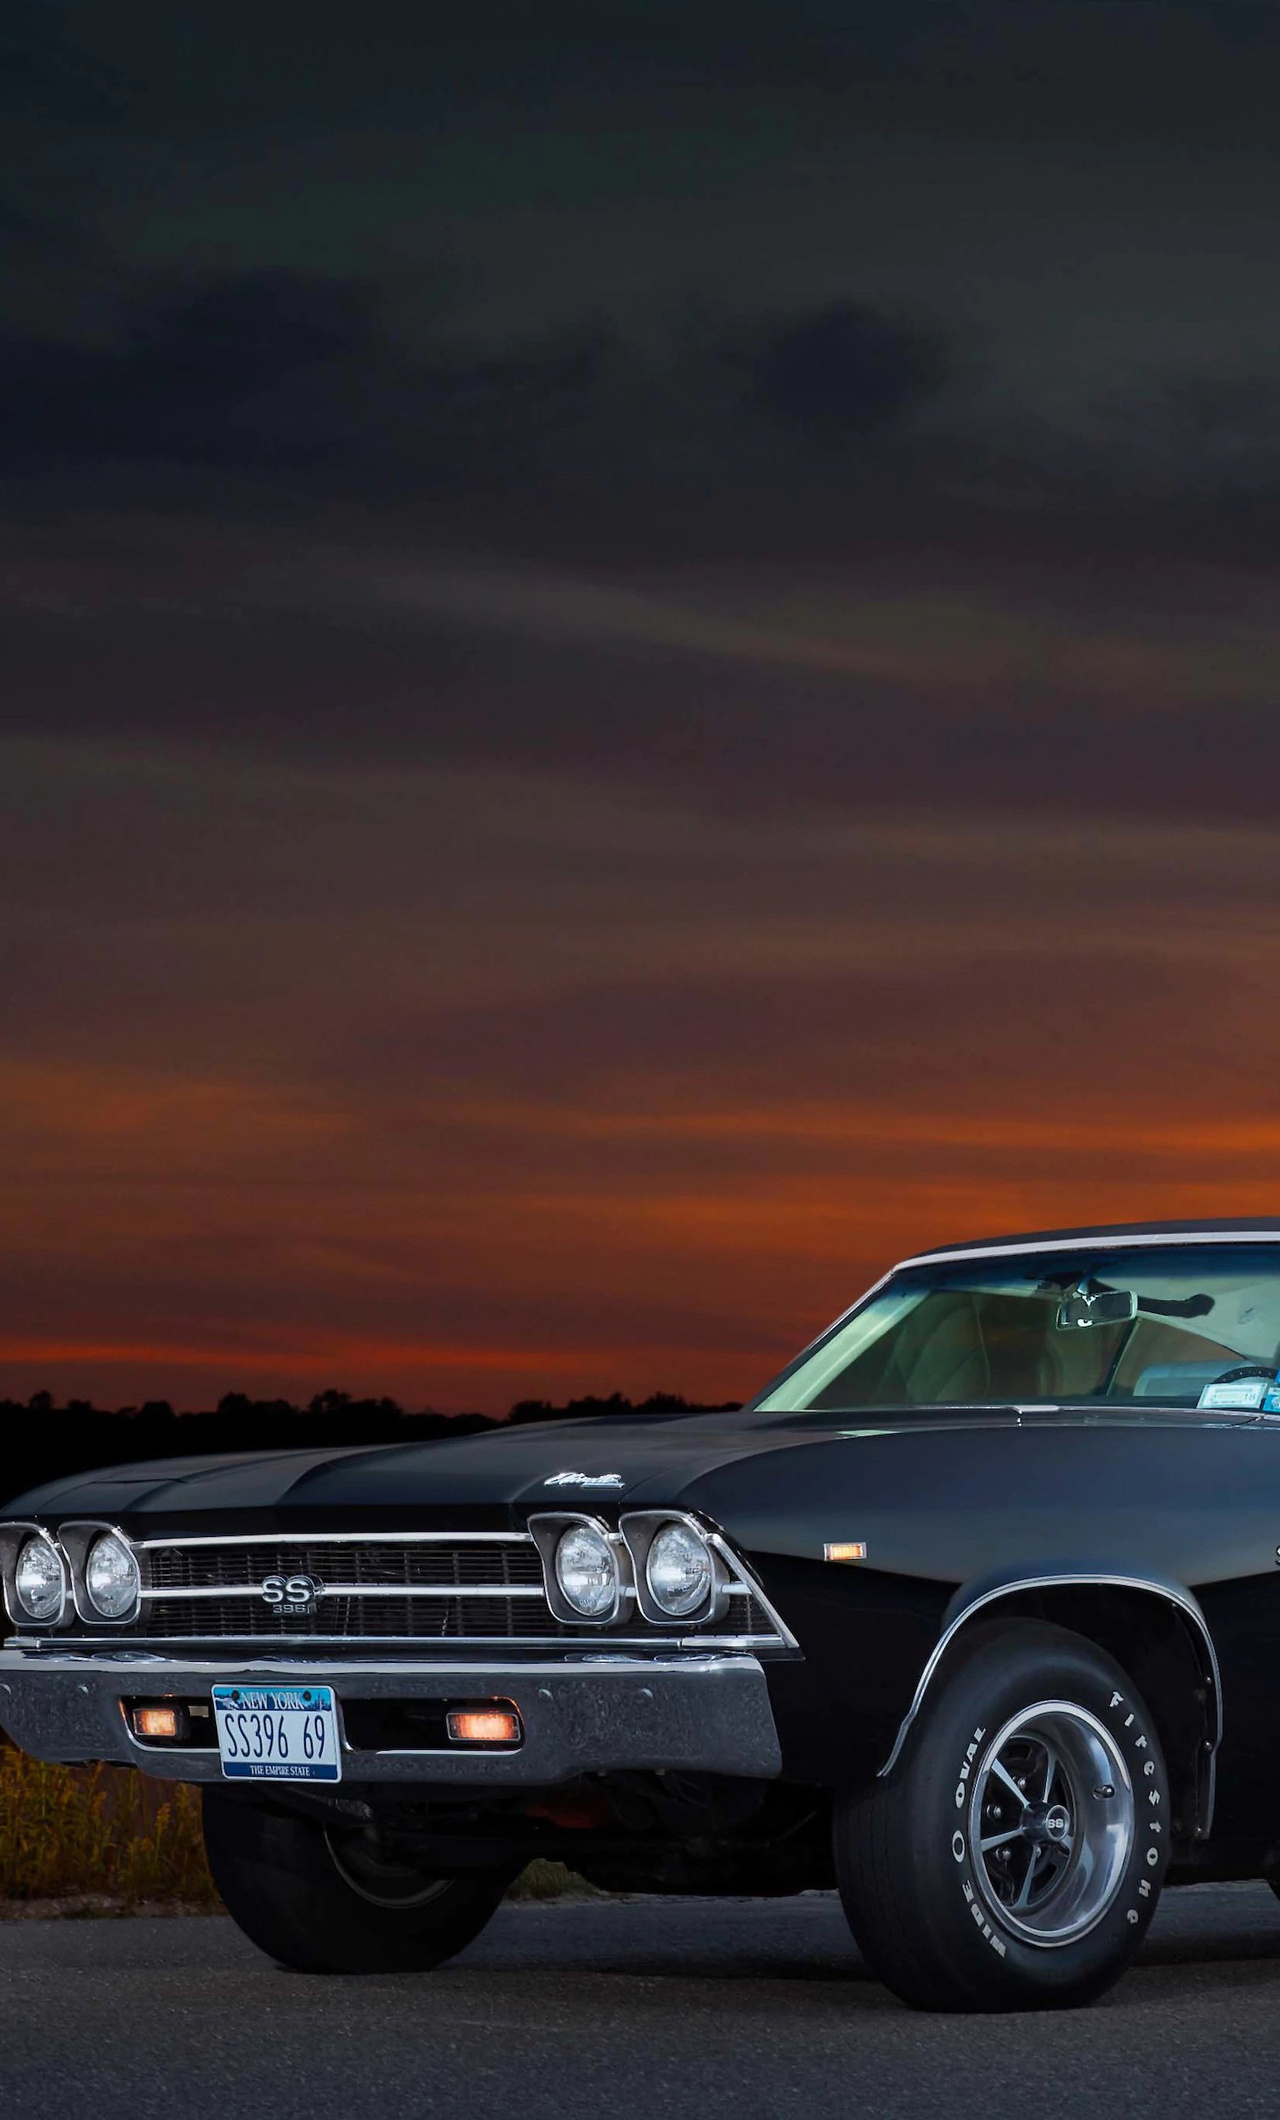 1969 Chevrolet Chevelle, SS 396 cid, Retro fascination, Muscle car wallpapers, iPhone, 1280x2120 HD Phone